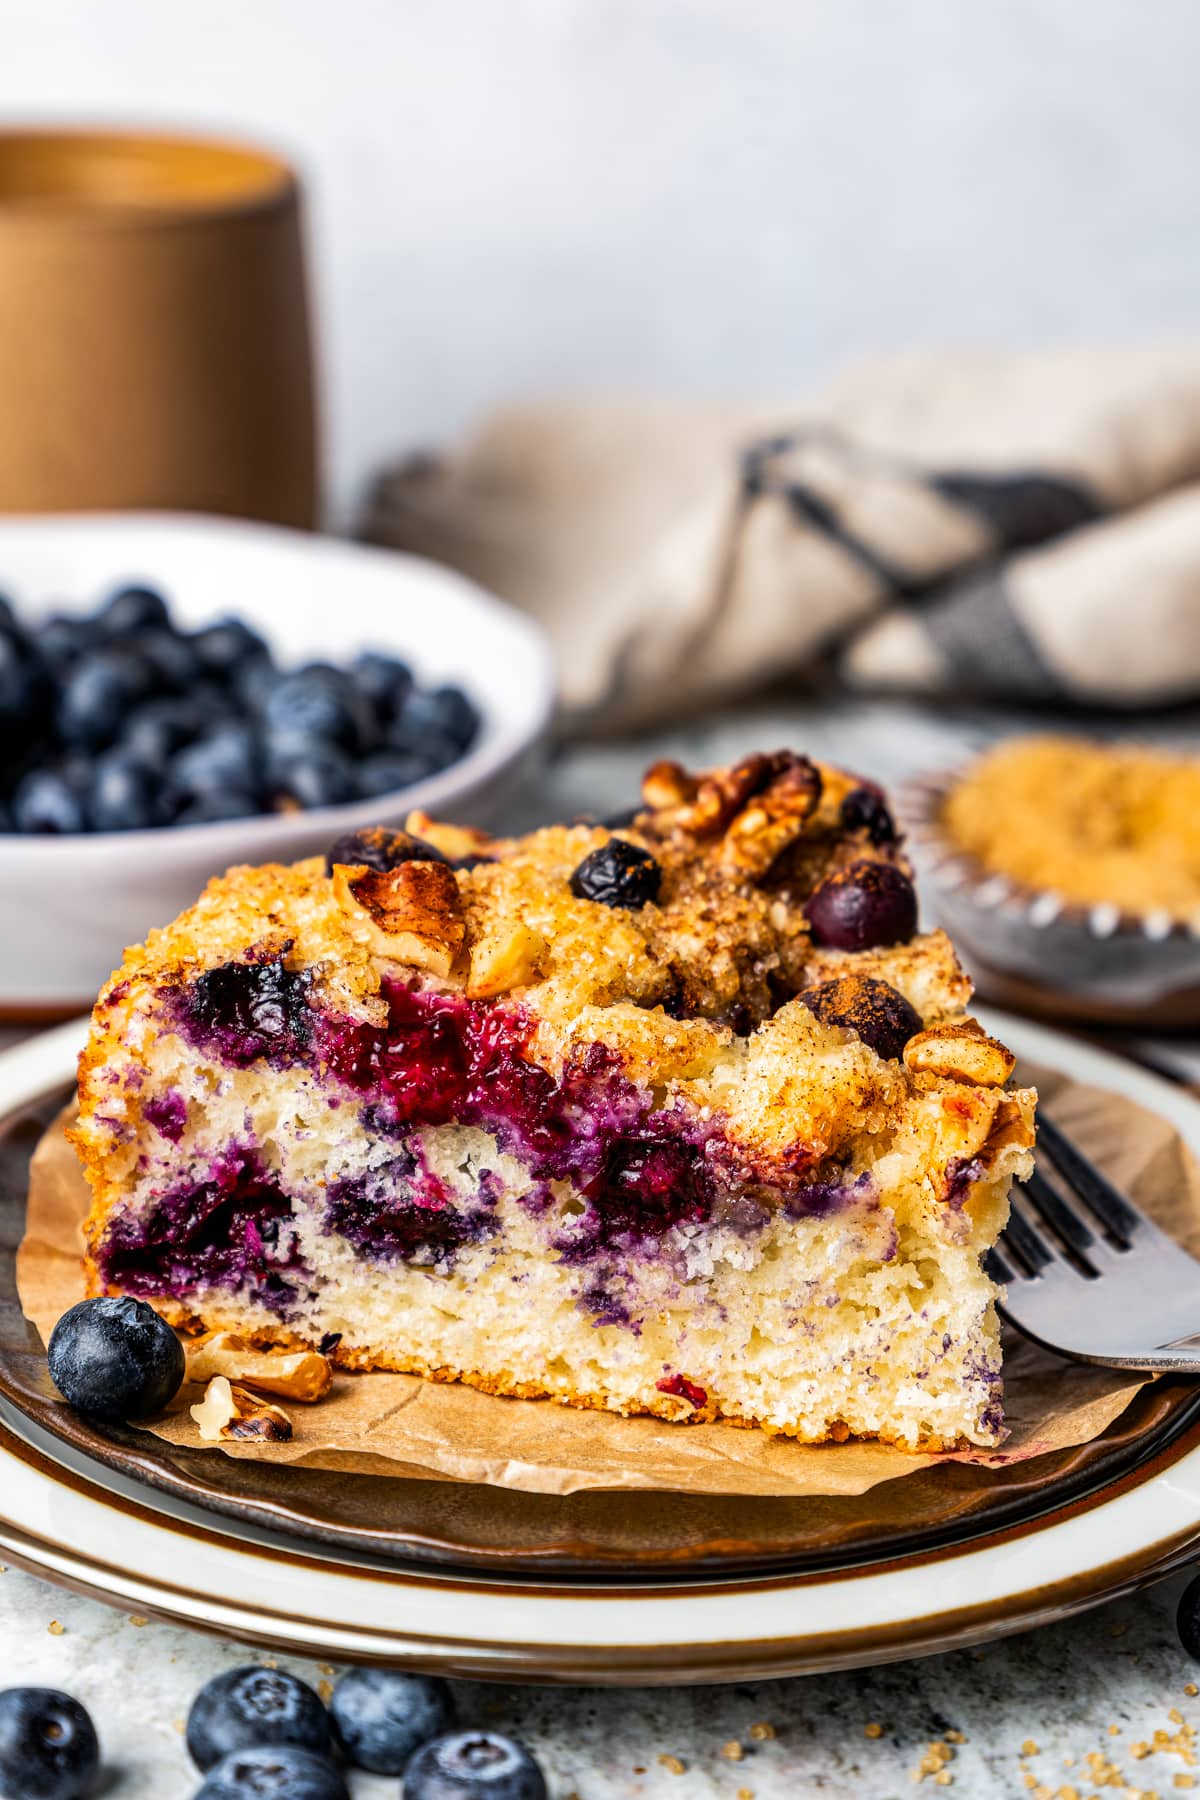 A slice of cake served on a plate with a bowl of blueberries in the background.